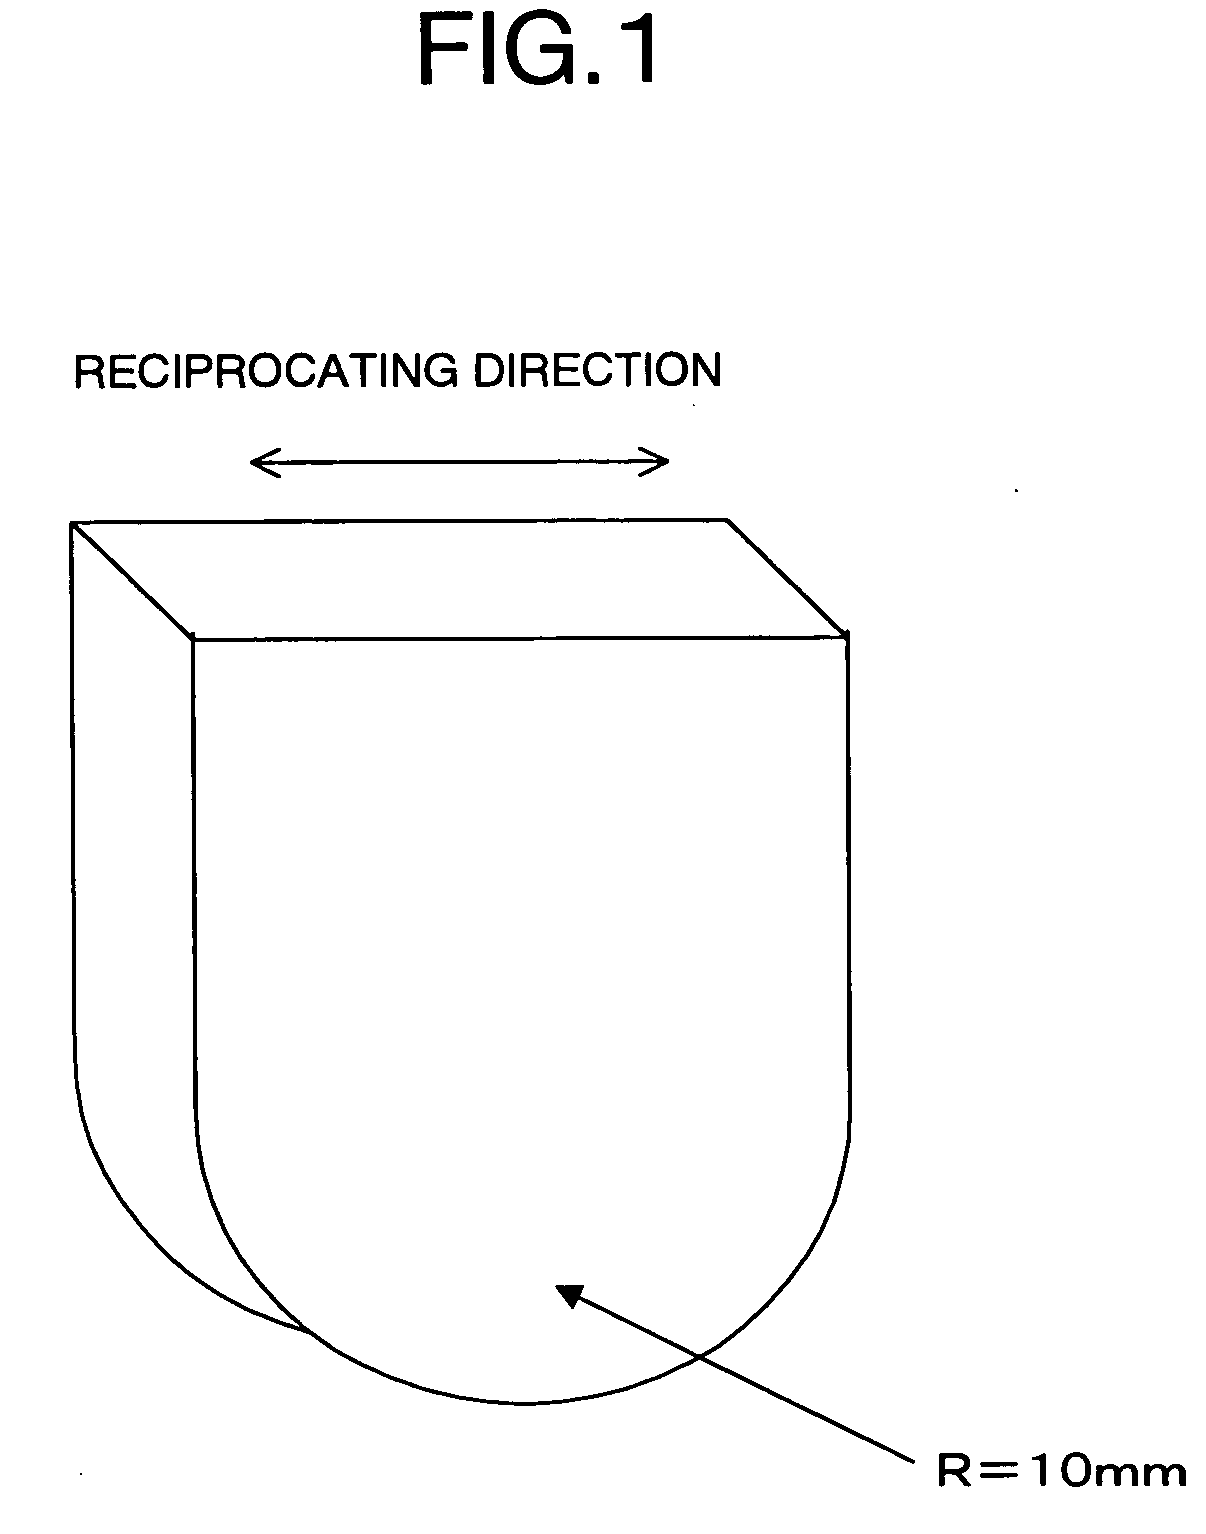 Coating composition